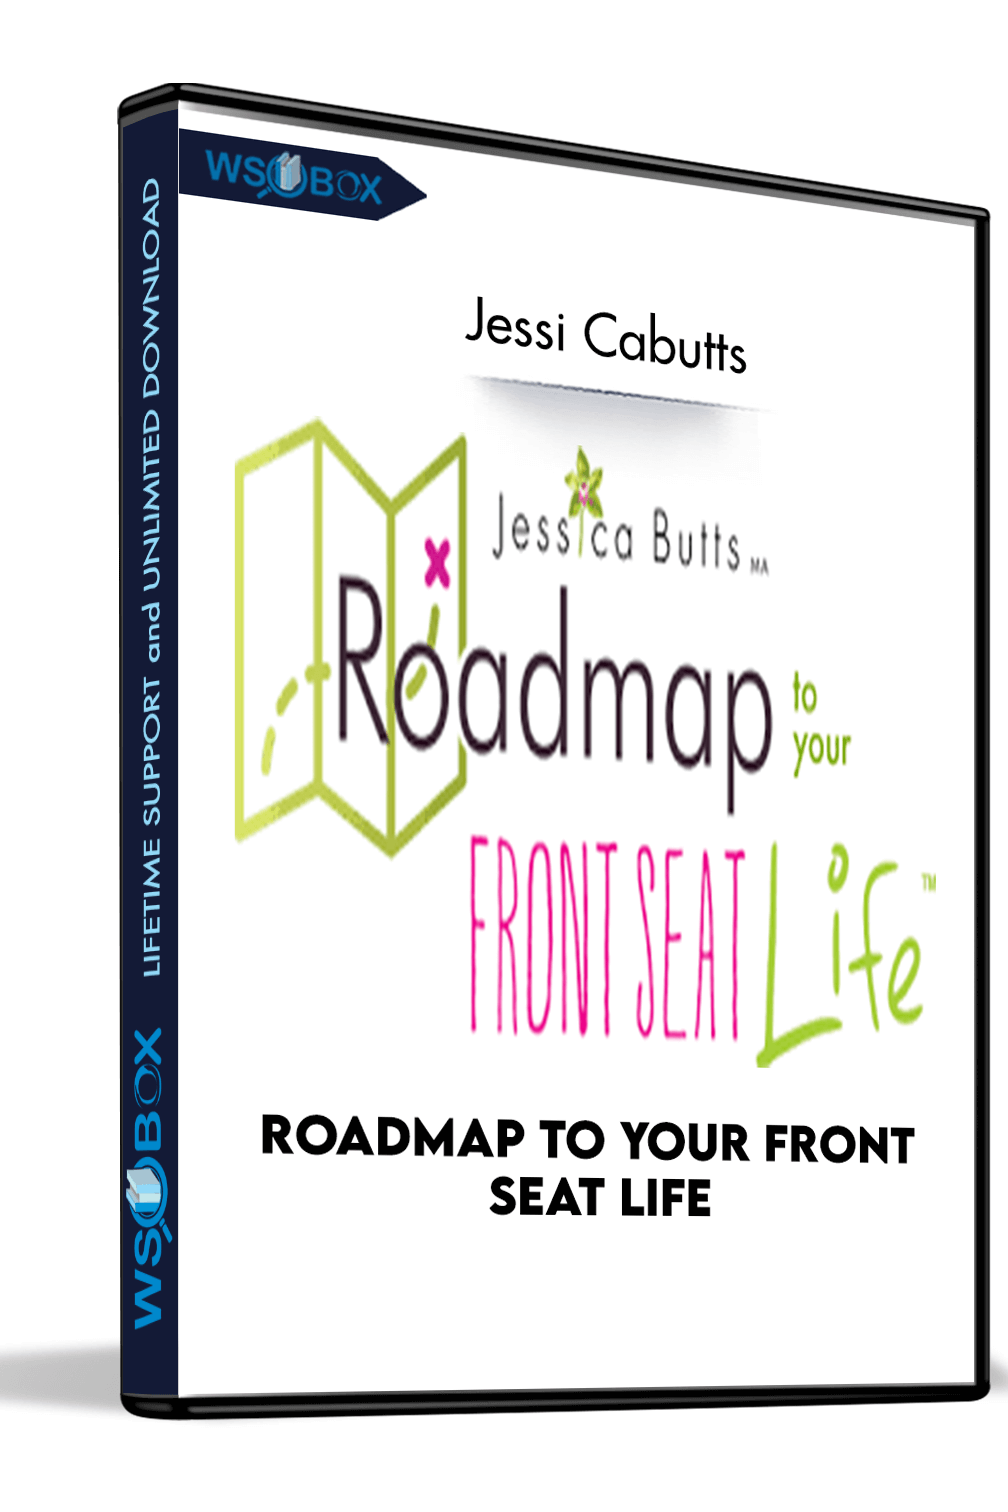 roadmap-to-your-front-seat-life-jessi-cabutts